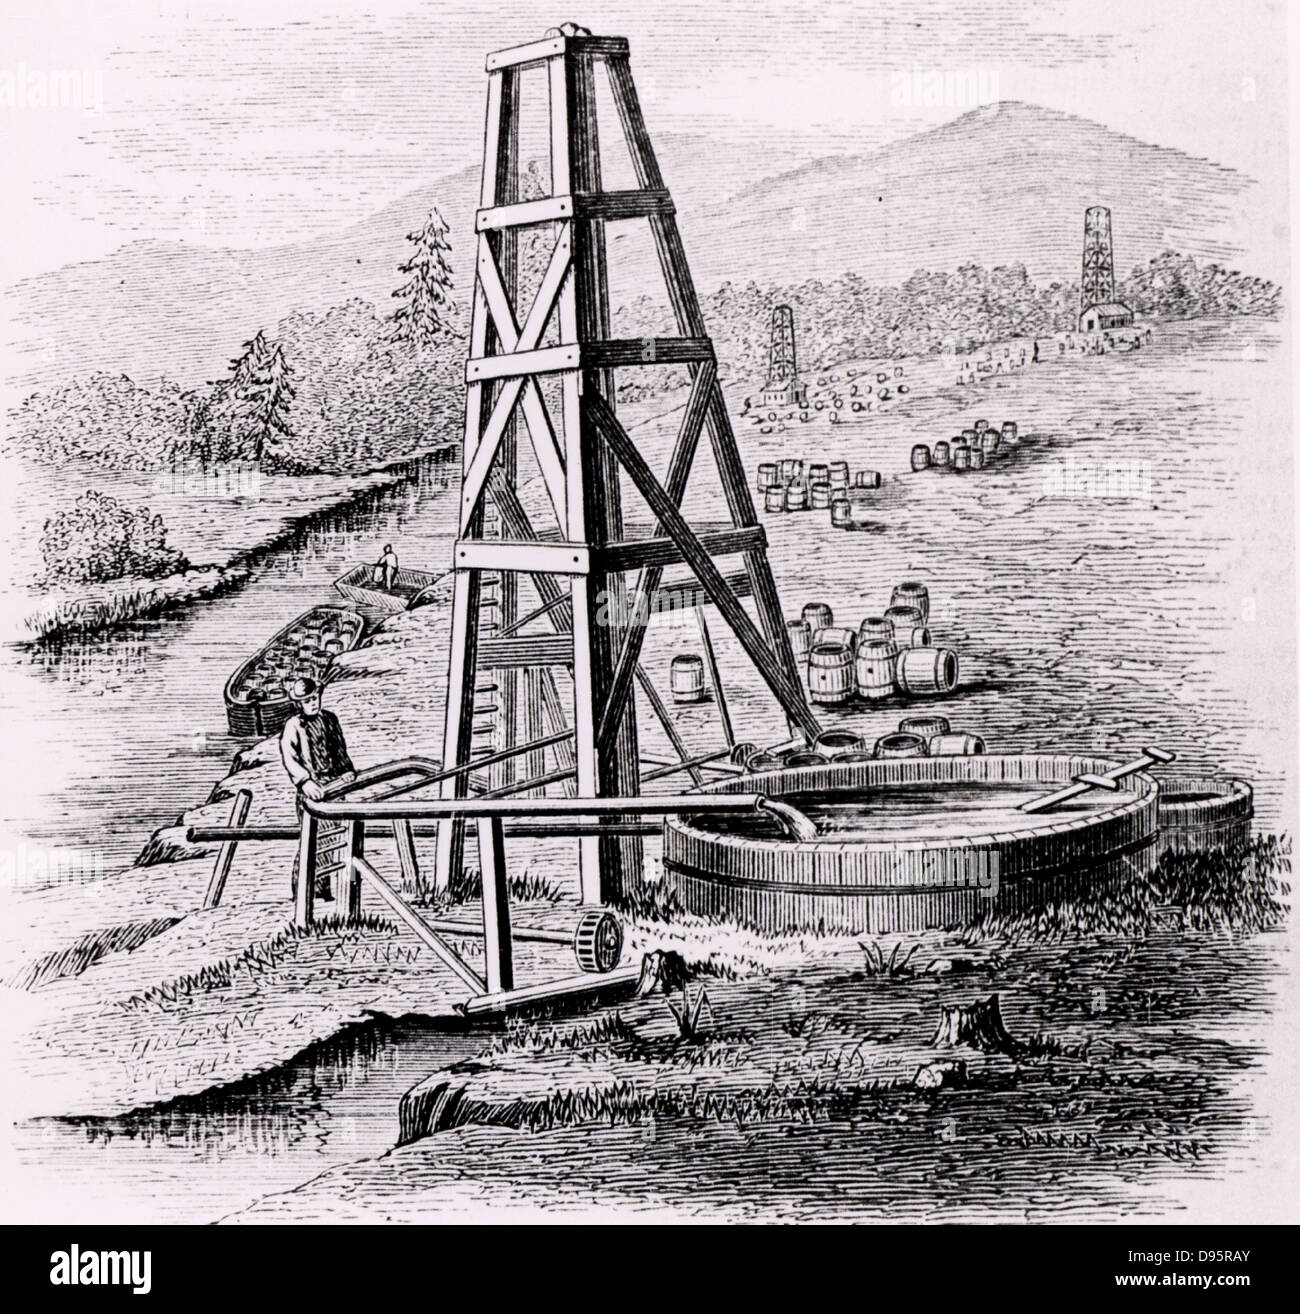 Oil wells at Oil Creek, 150 miles up the Allegheny River from Pittsburgh, Pennsylvania, USA.    Engraving from 'The Practical Dictionary of Mechanics' edited by Edward H Knight (New York and London, c1880) Stock Photo